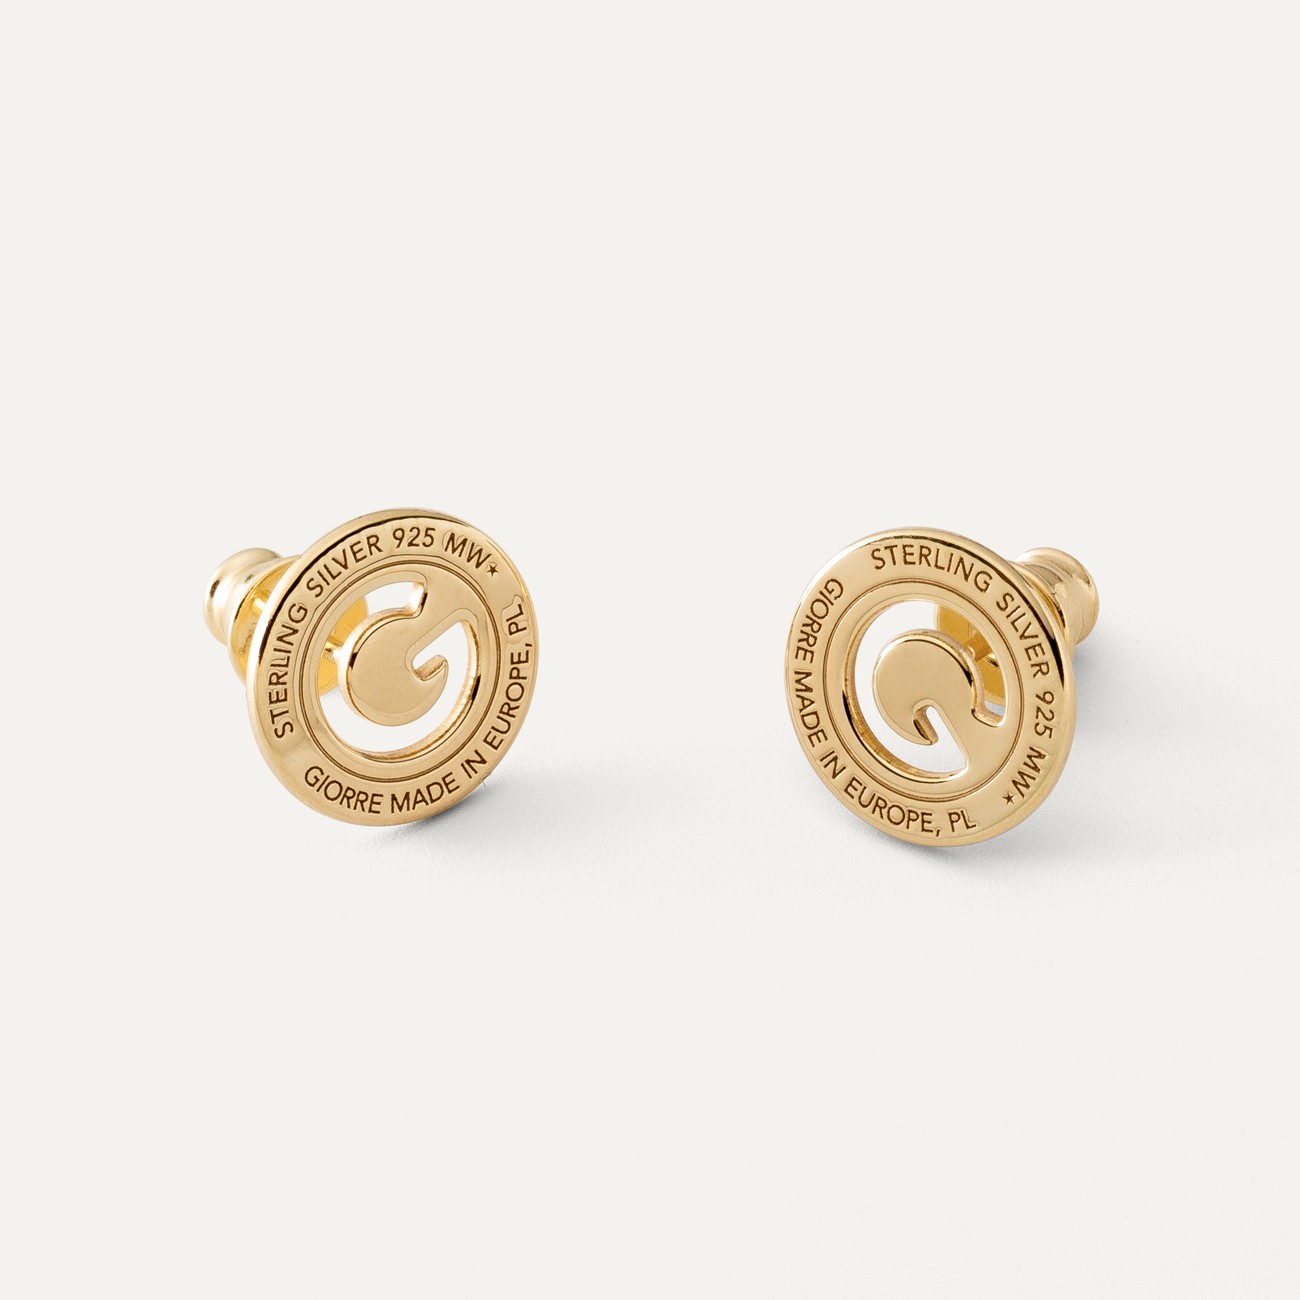 EARRINGS GIORRE BRAND, STERLING SILVER (925) RHODIUM OR GOLD PLATED